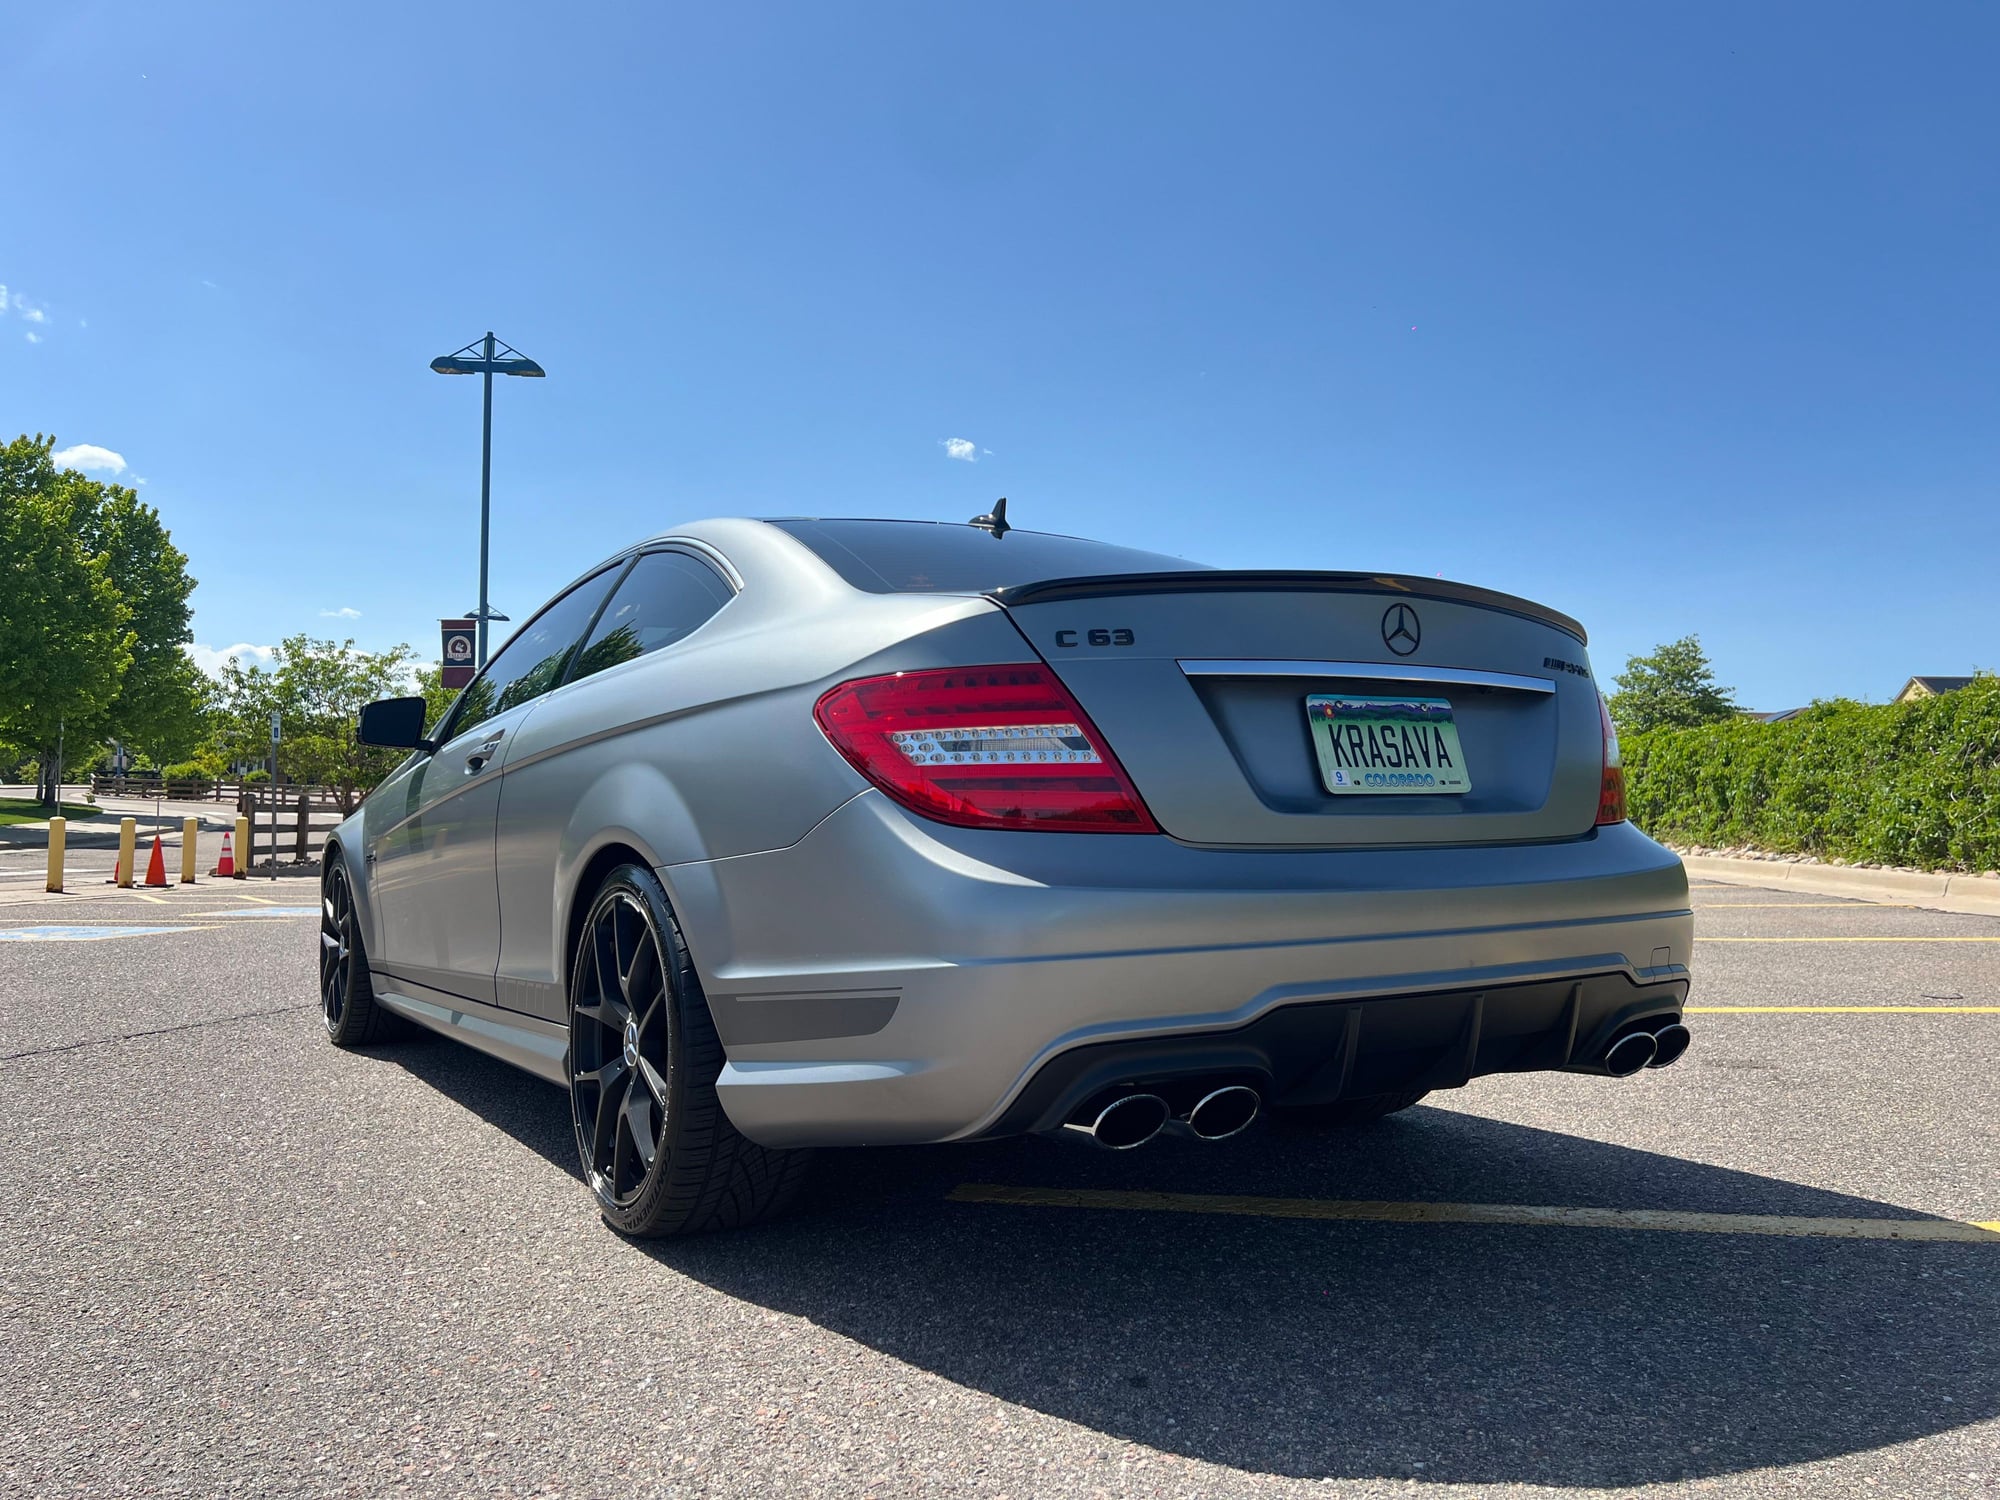 2014 Mercedes-Benz C63 AMG - 2014 Mercedes-Benz C63 AMG 507 Edition Magno w/ Limited Slip... - Used - VIN WDDGJ7HB9EG266583 - 63,500 Miles - 8 cyl - 2WD - Automatic - Coupe - Gray - Aurora, CO 80014, United States